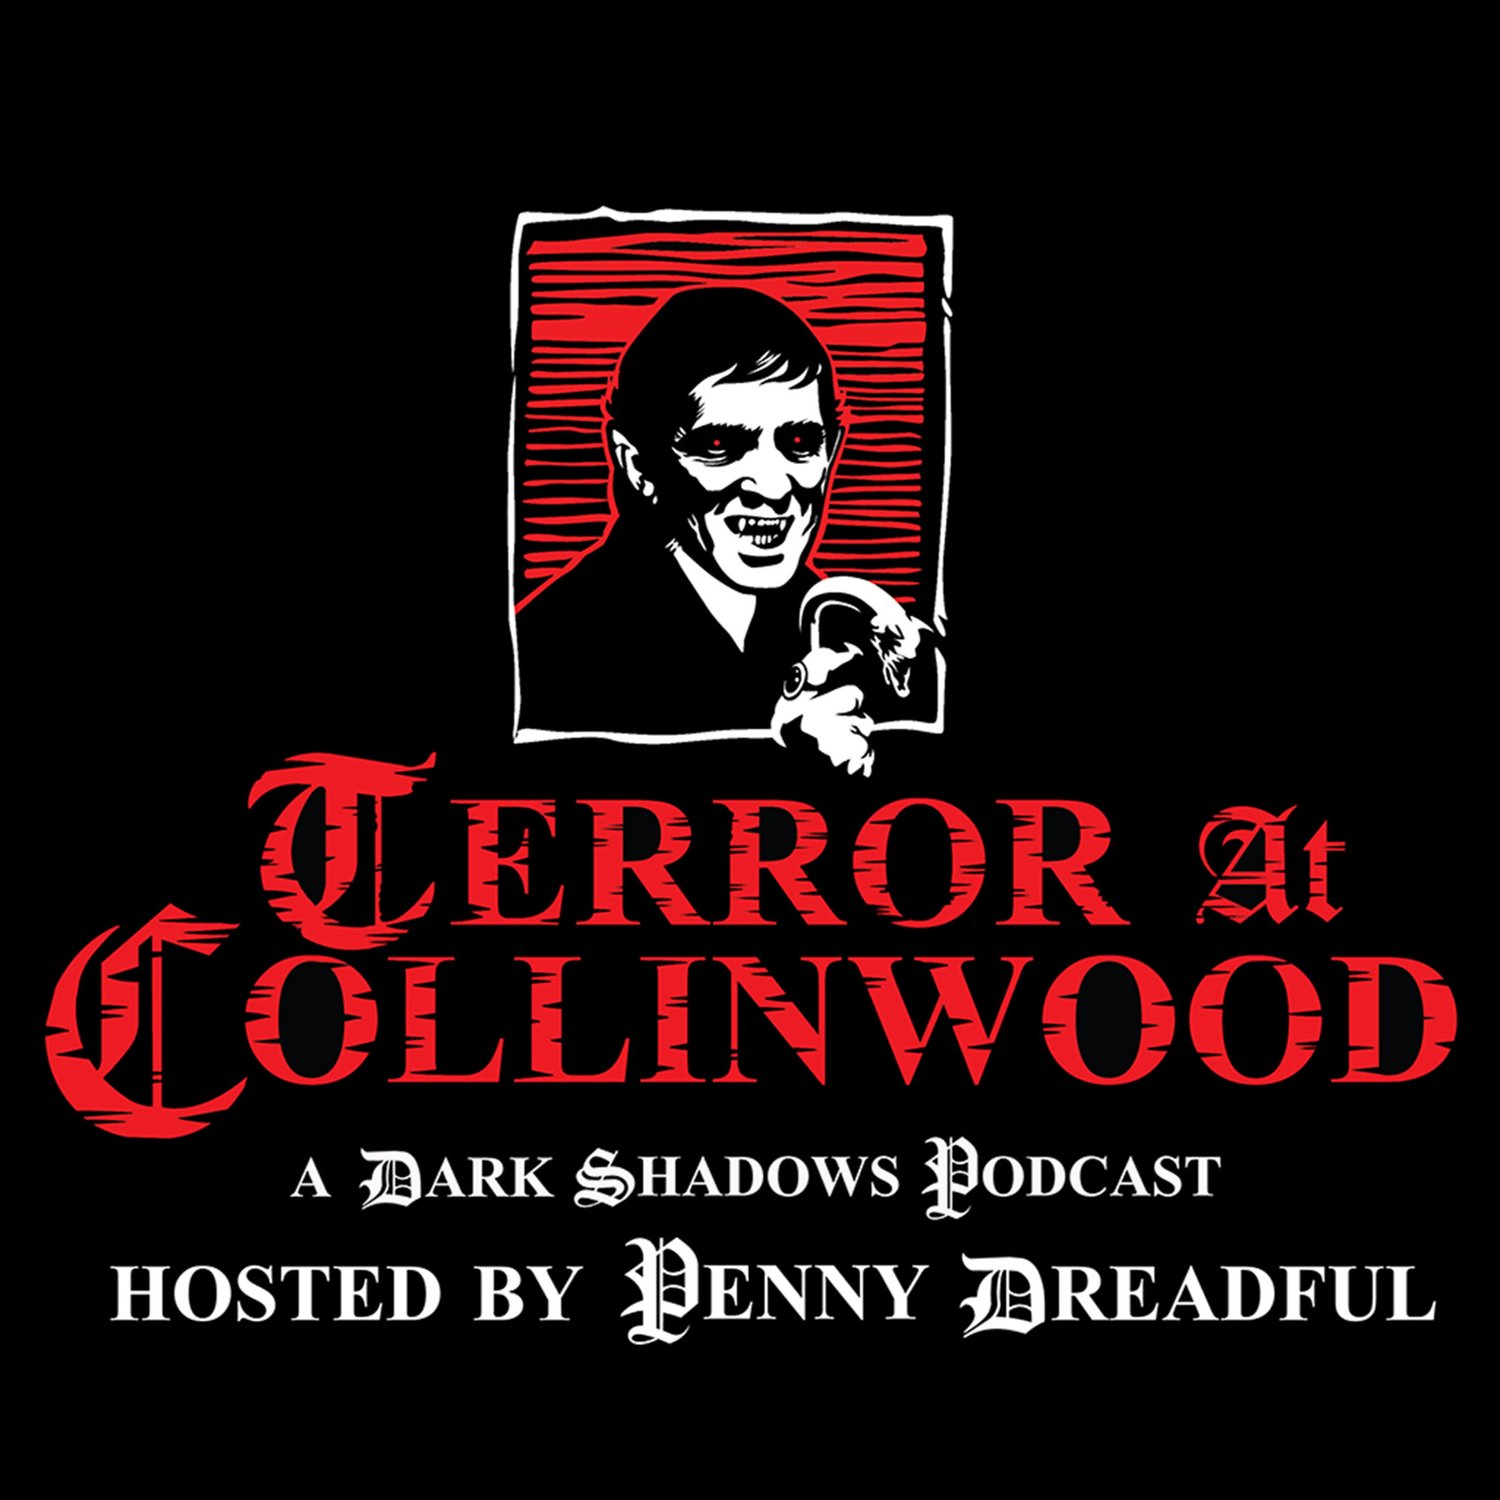 Terror at Collinwood Episode 65: The Weird Cat and Creative Influence of DS with Katherine Kerestman and Stephen Mark Rainey